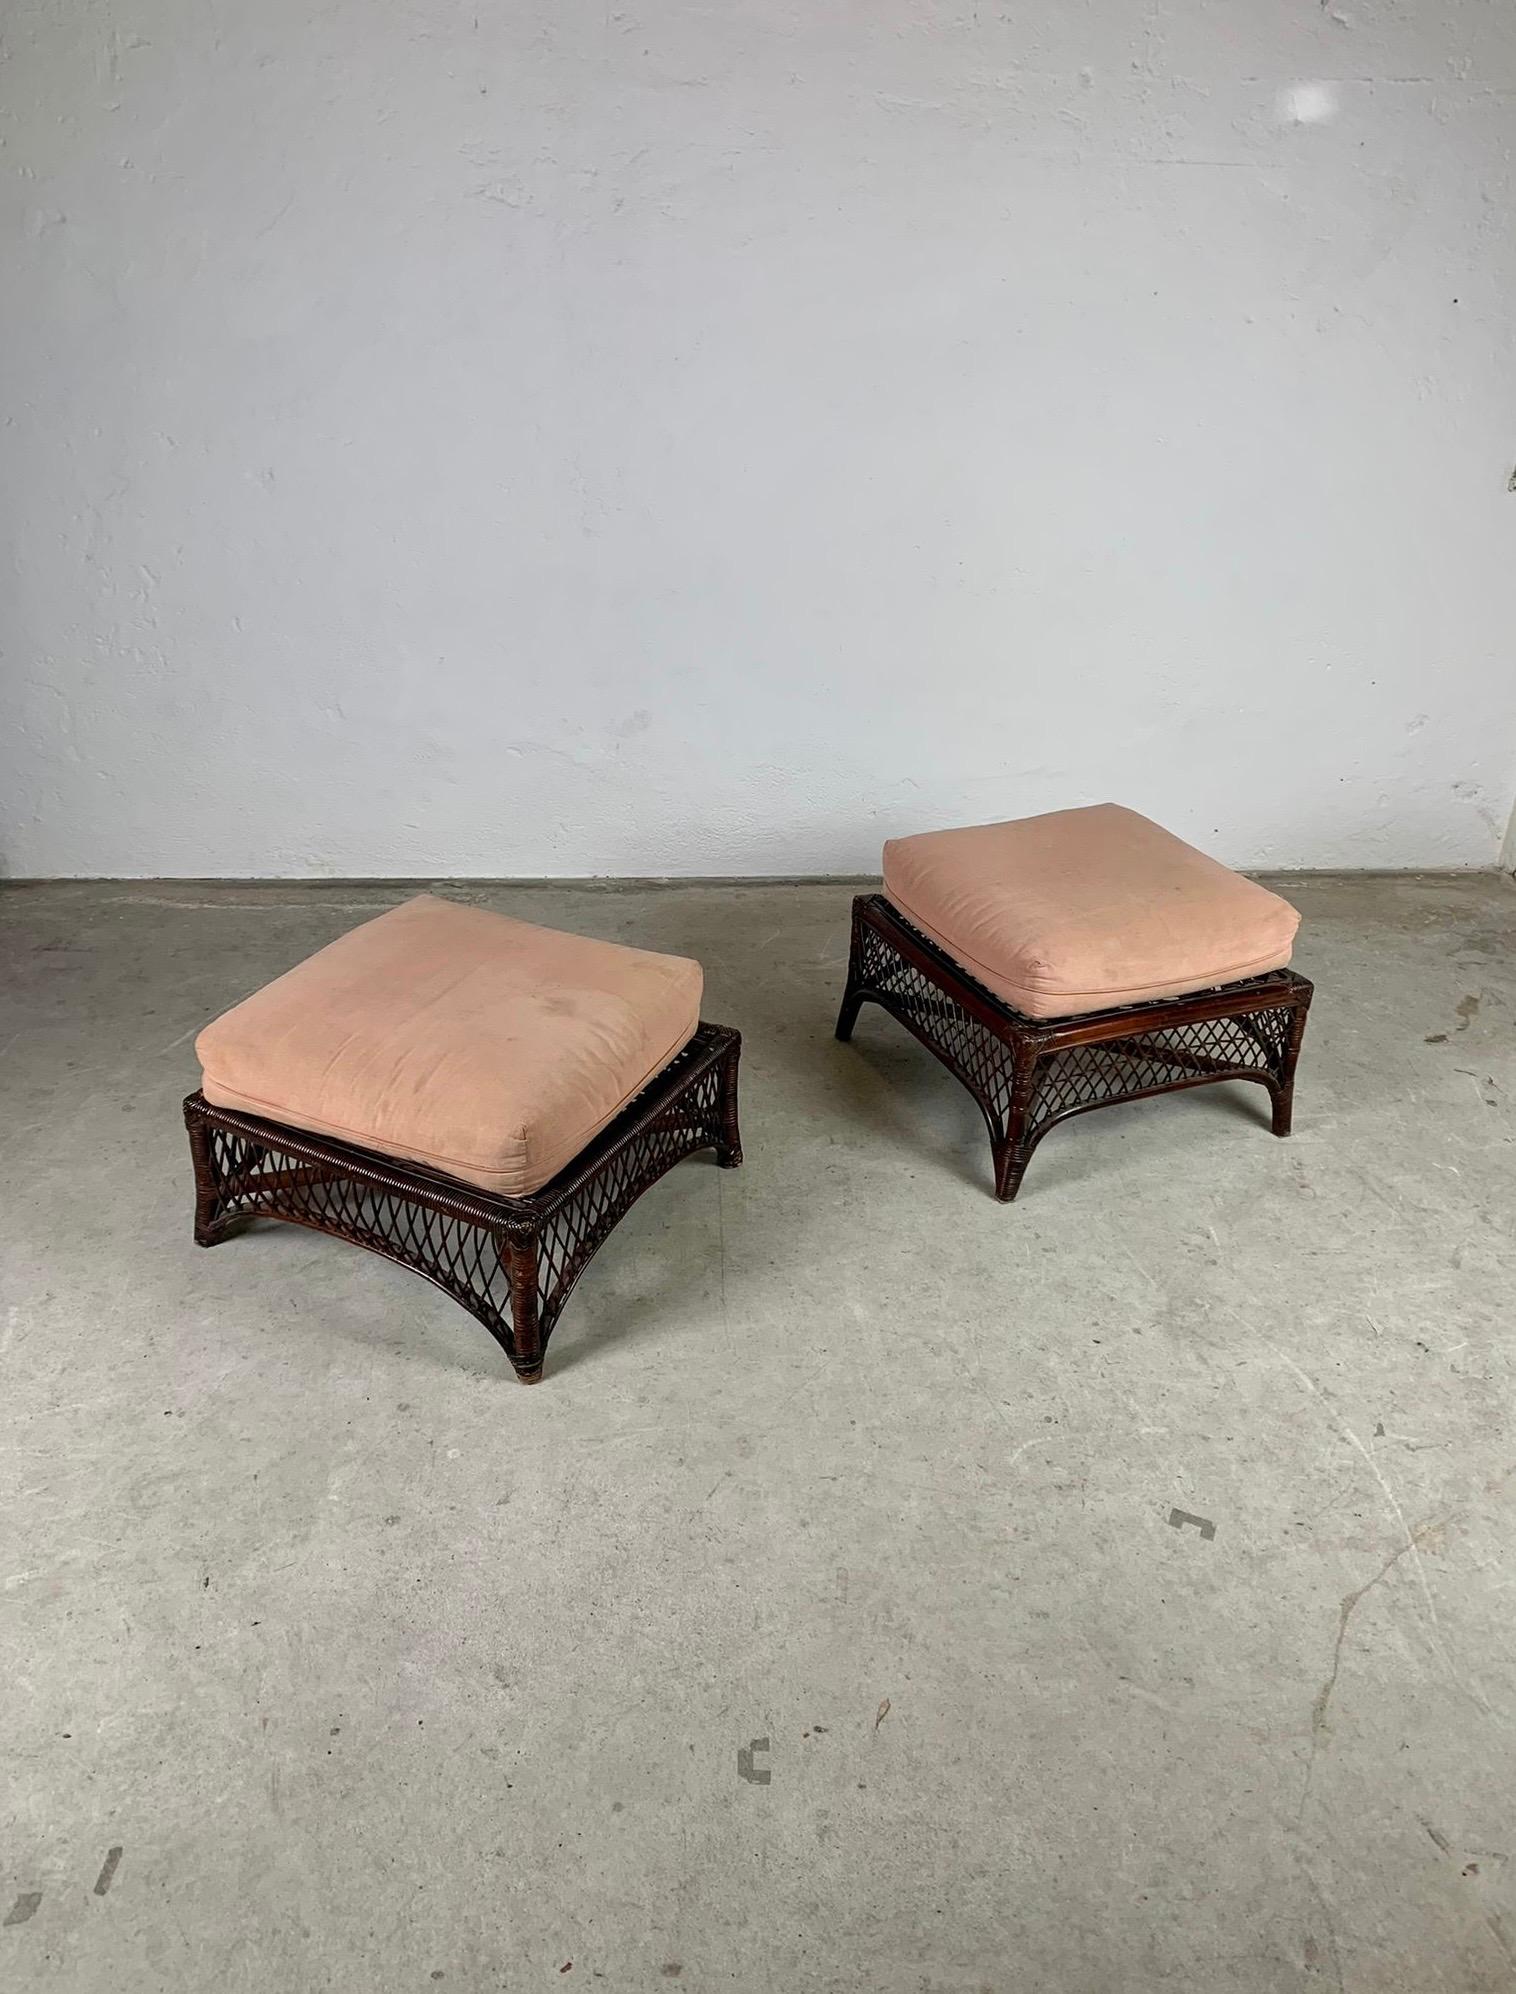 Bamboo ottomans with cushions, Italy, 1960s
Pair of bamboo ottomans of two different sizes, with cushions. 
Good condition,slight signs of wear and tear can be seen in the photo. 
The two ottomans have slightly different measurements: 68x 68x 35 h